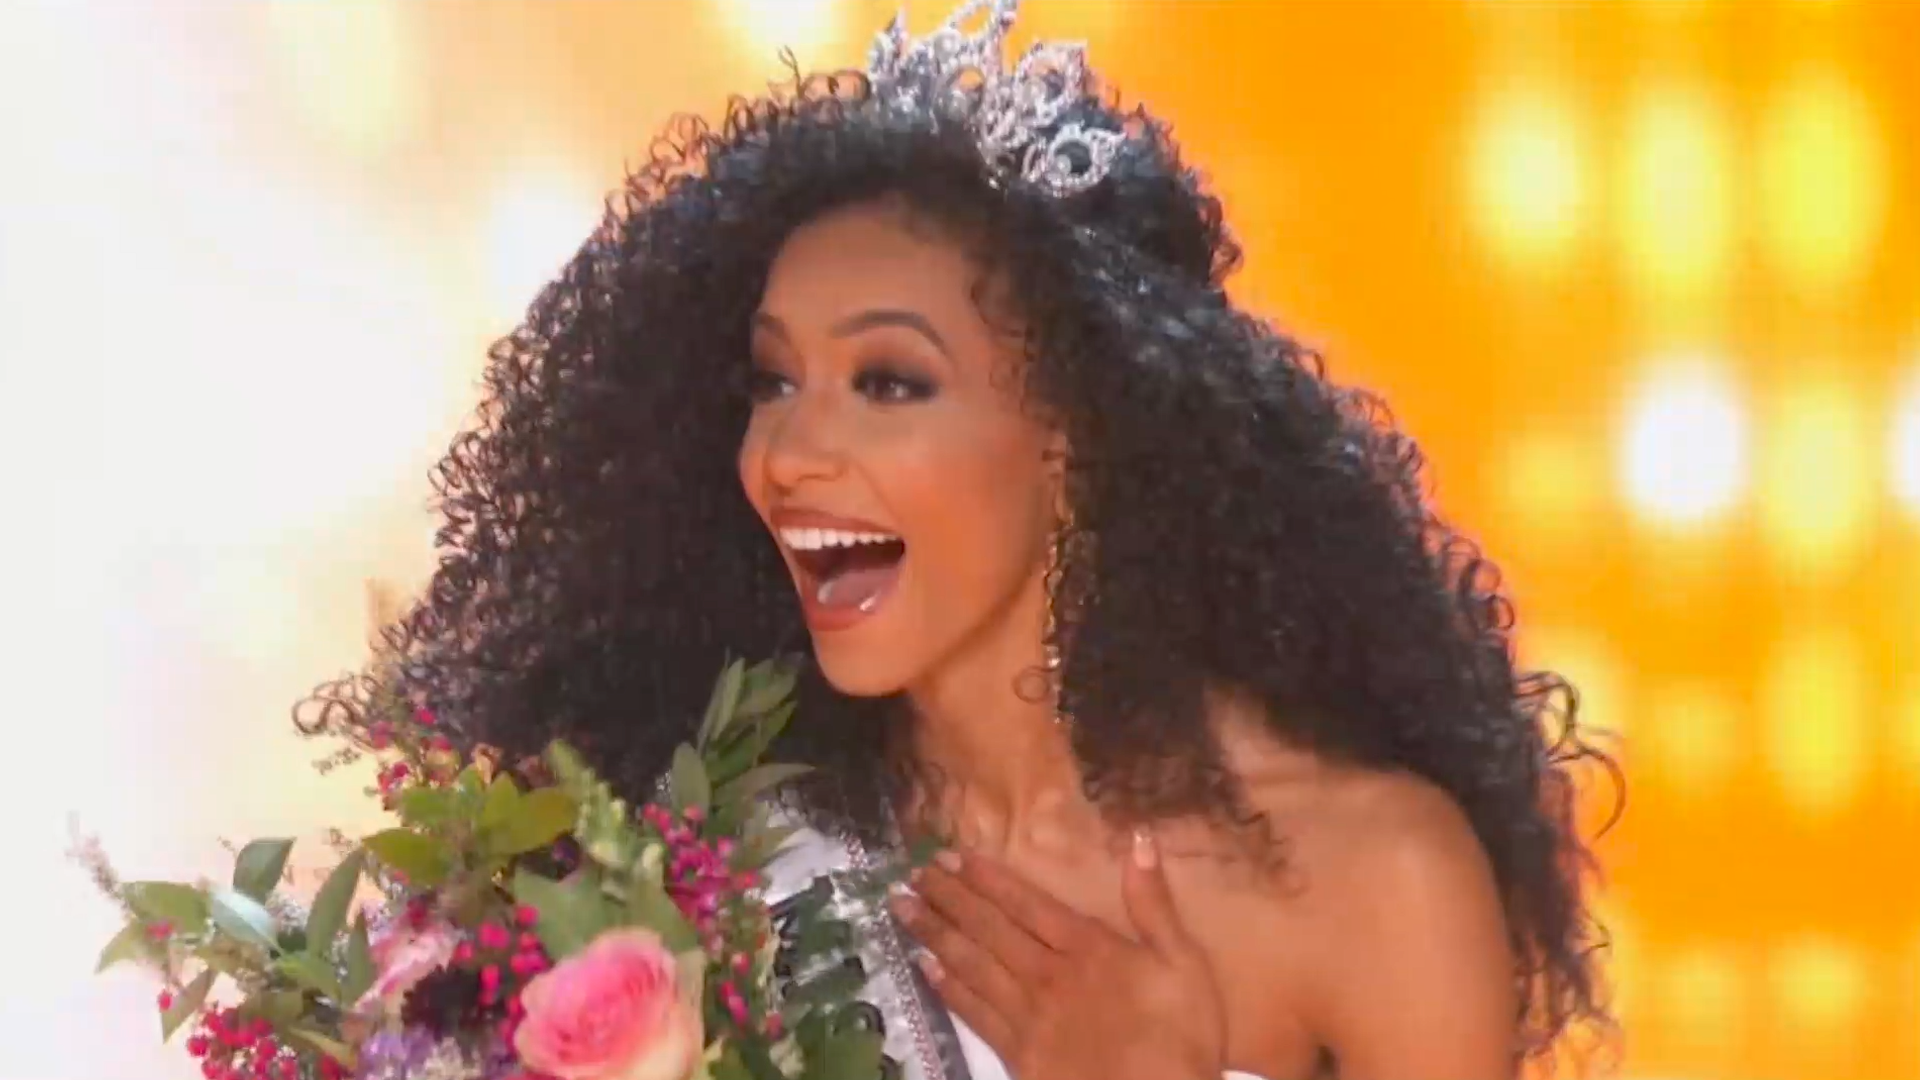 North Carolina lawyer is named Miss USA 2019, and Twitter is here for it